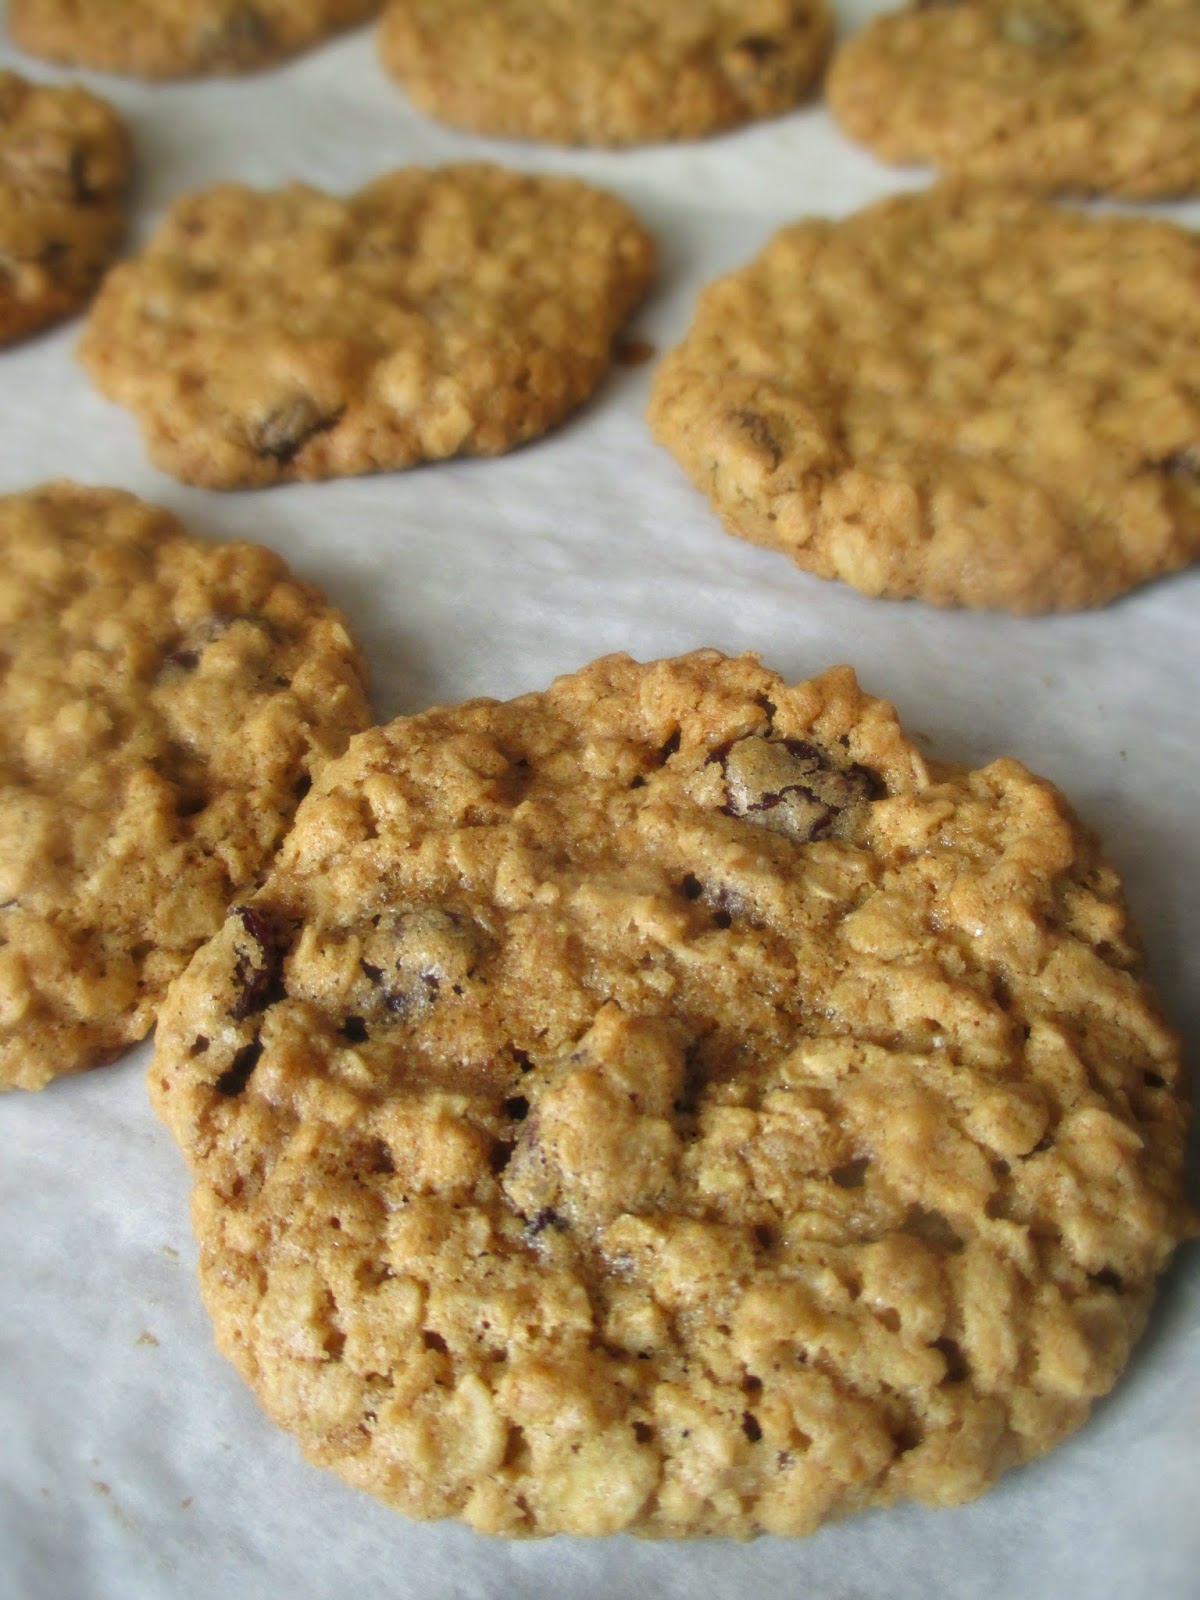 Just my Stuff: Old Mill Oatmeal Cookies